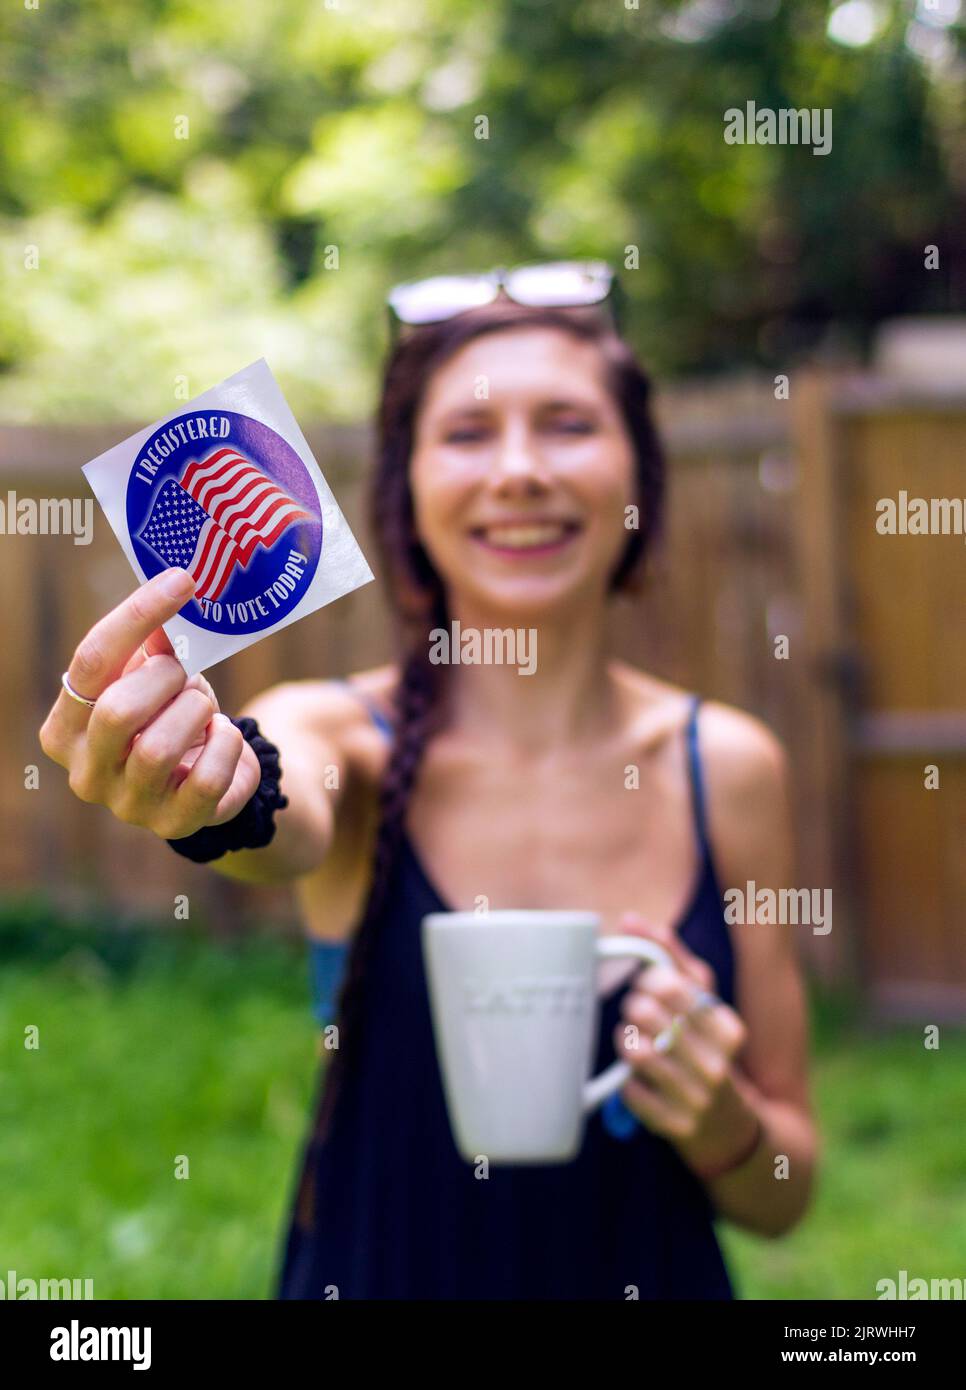 A young woman holds a voter registration sticker, as the Supreme Court's Dobbs decision creates a surge of newly registered voters across the US Stock Photo